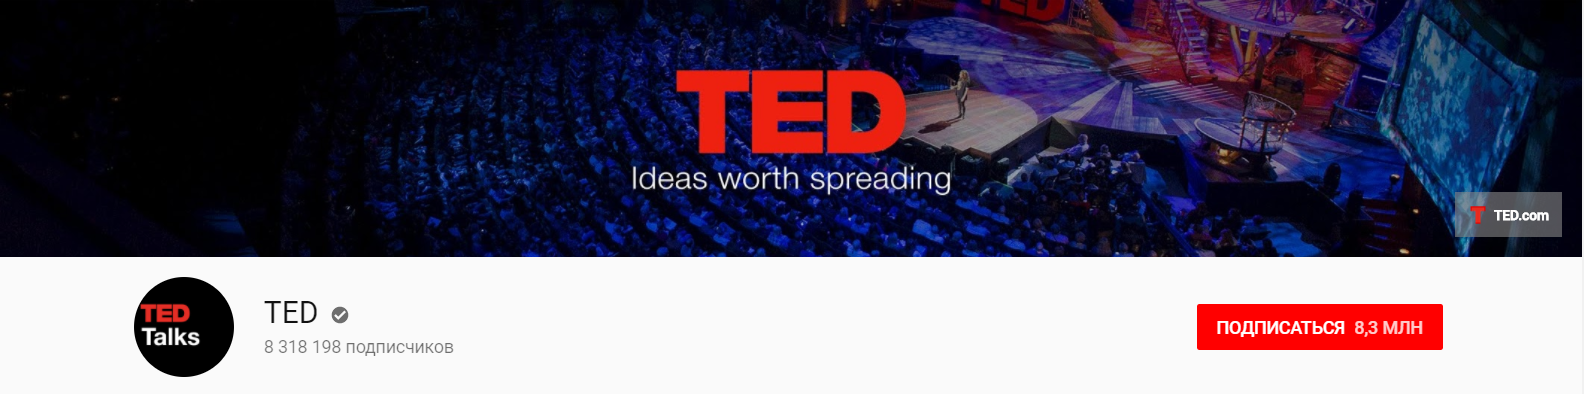 TED - идеи для фона YouTube-канала